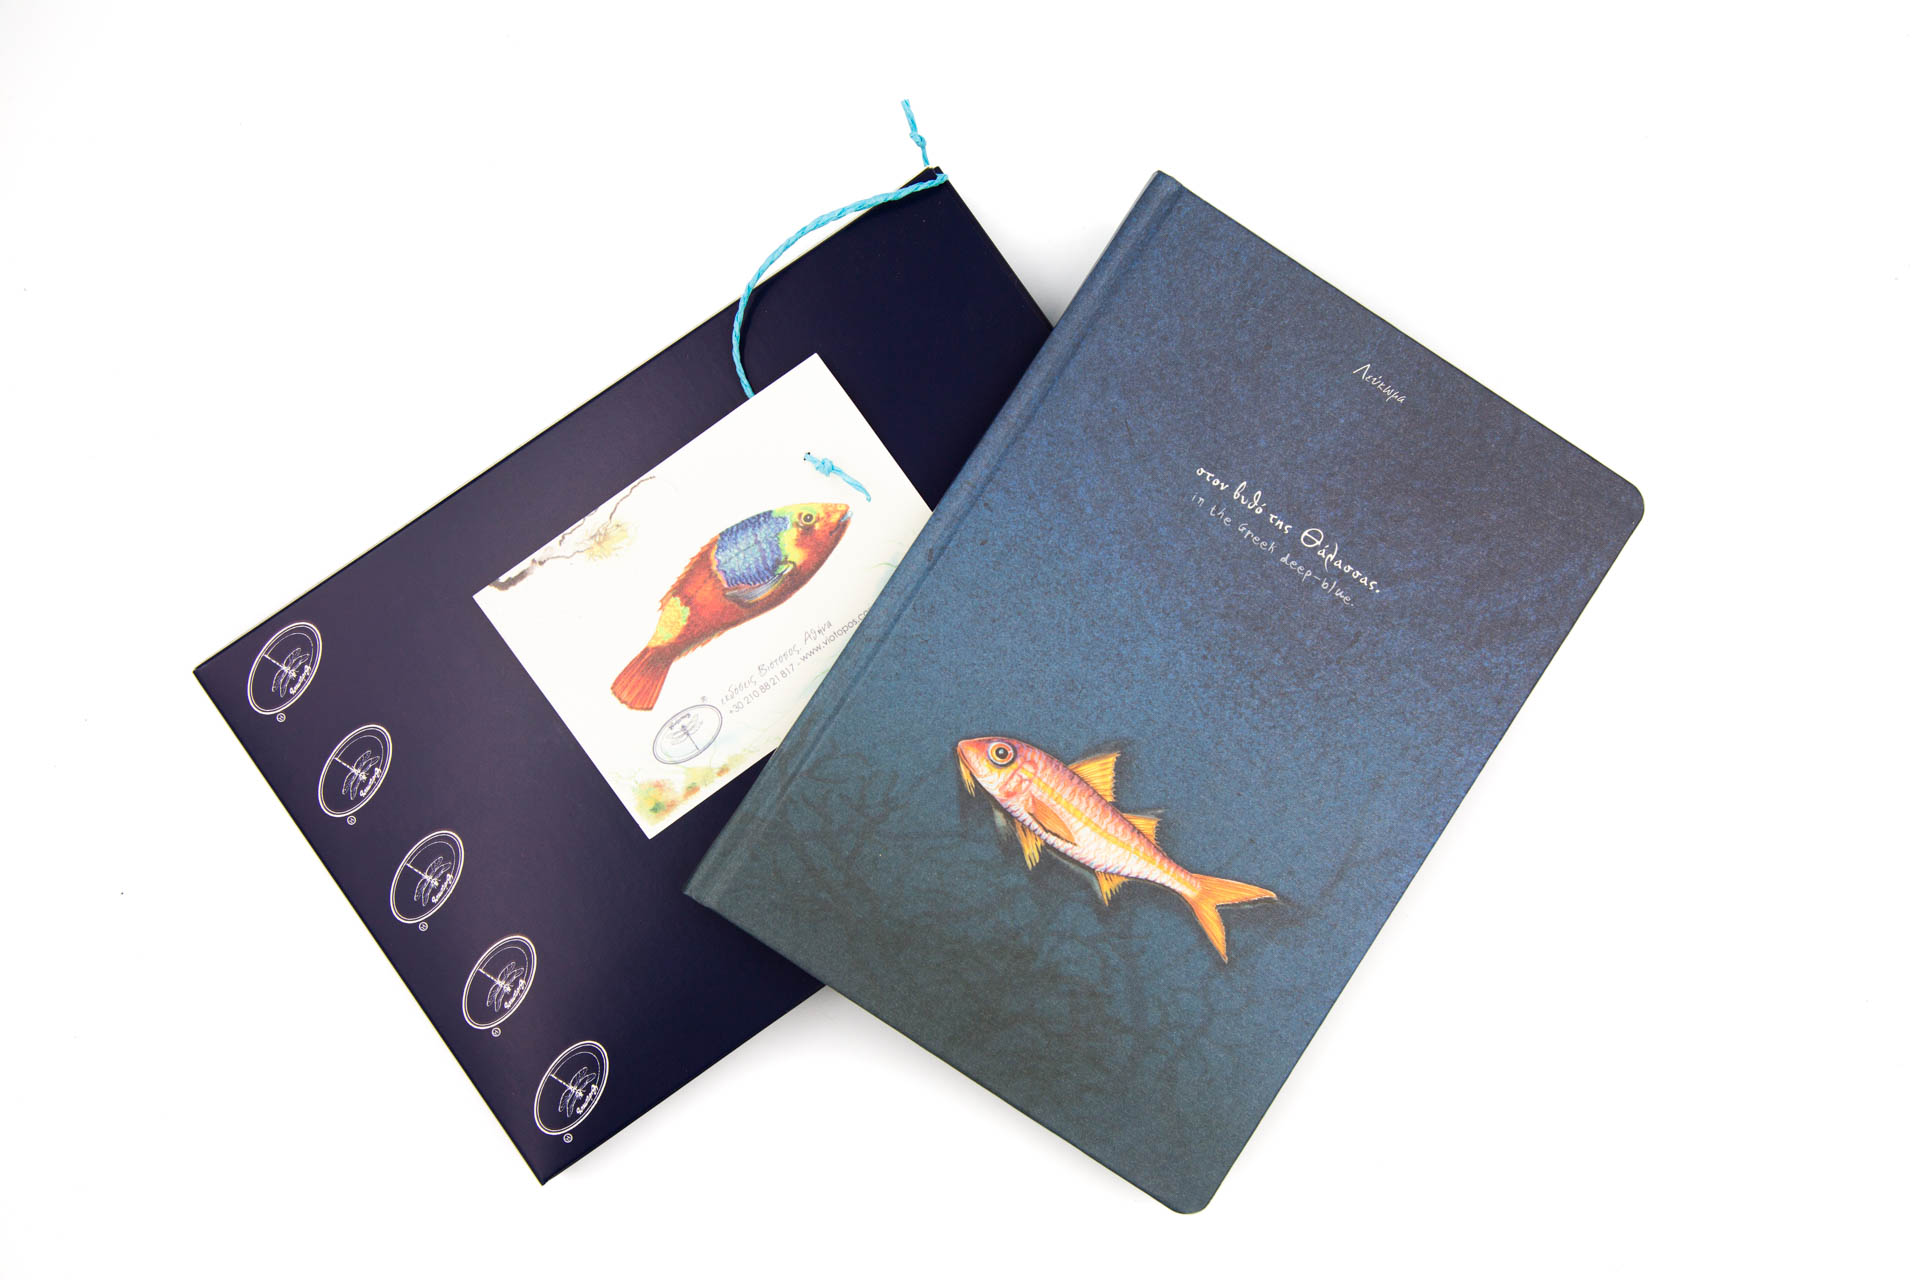 Book of secrets "in the Greek Deep-blue" - Front and Packaging